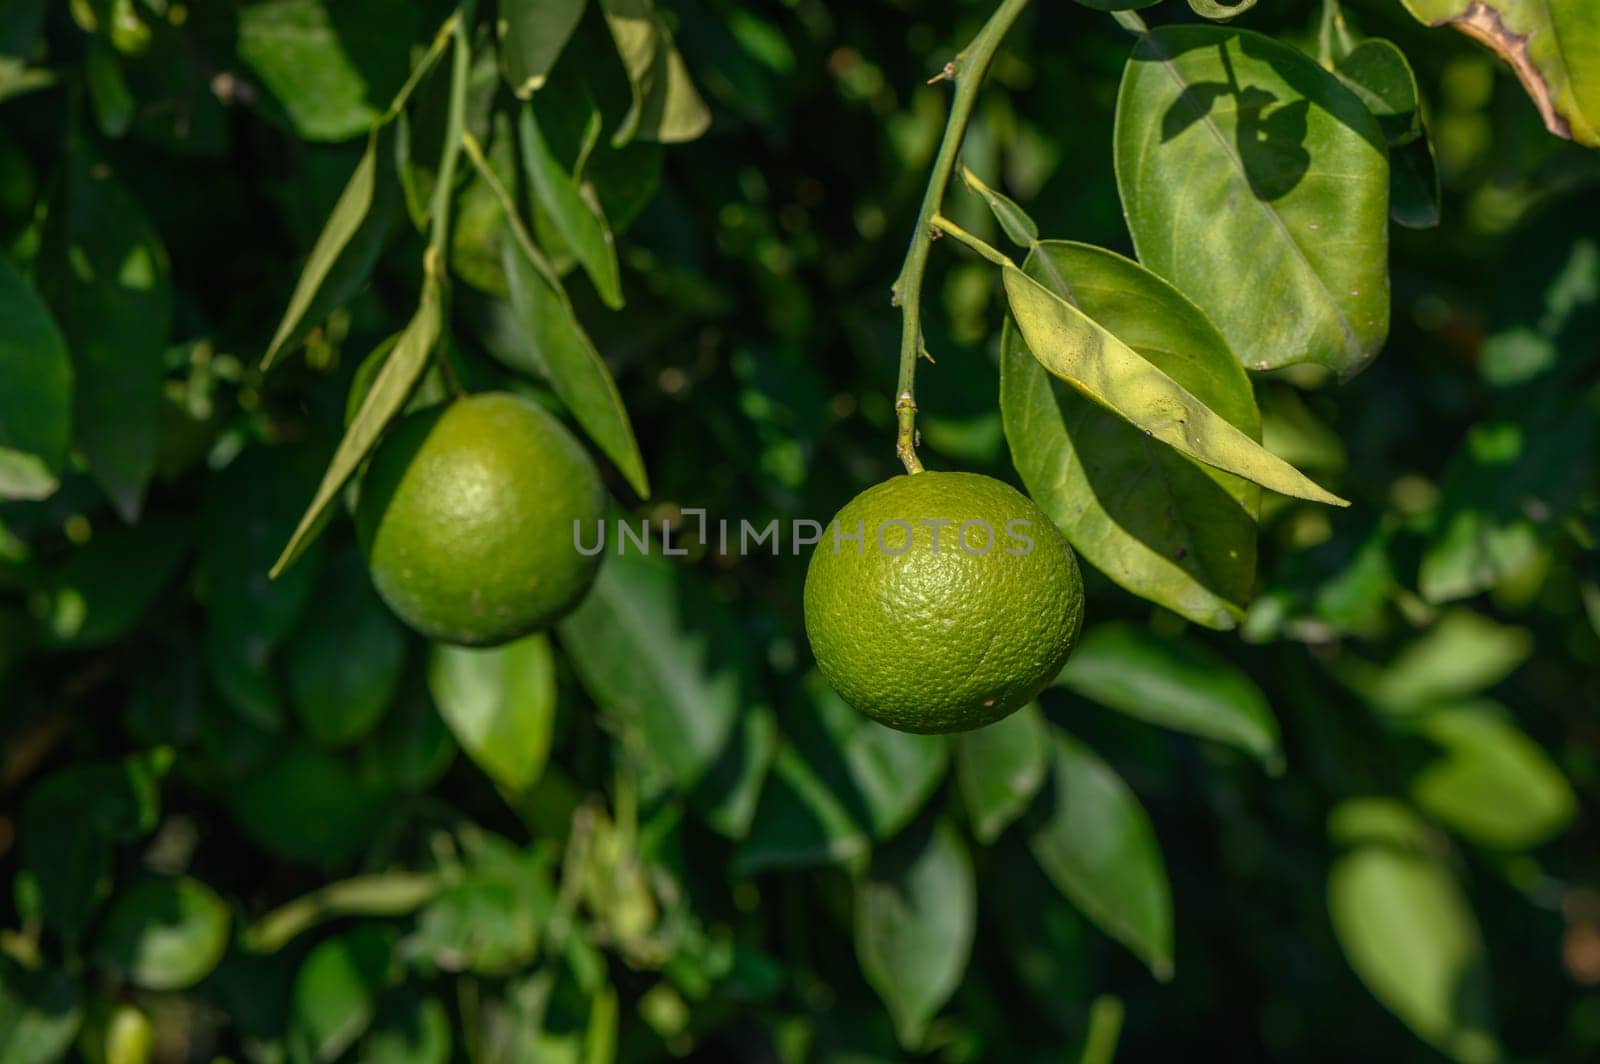 green oranges on tree branches in autumn in Cyprus 1 by Mixa74